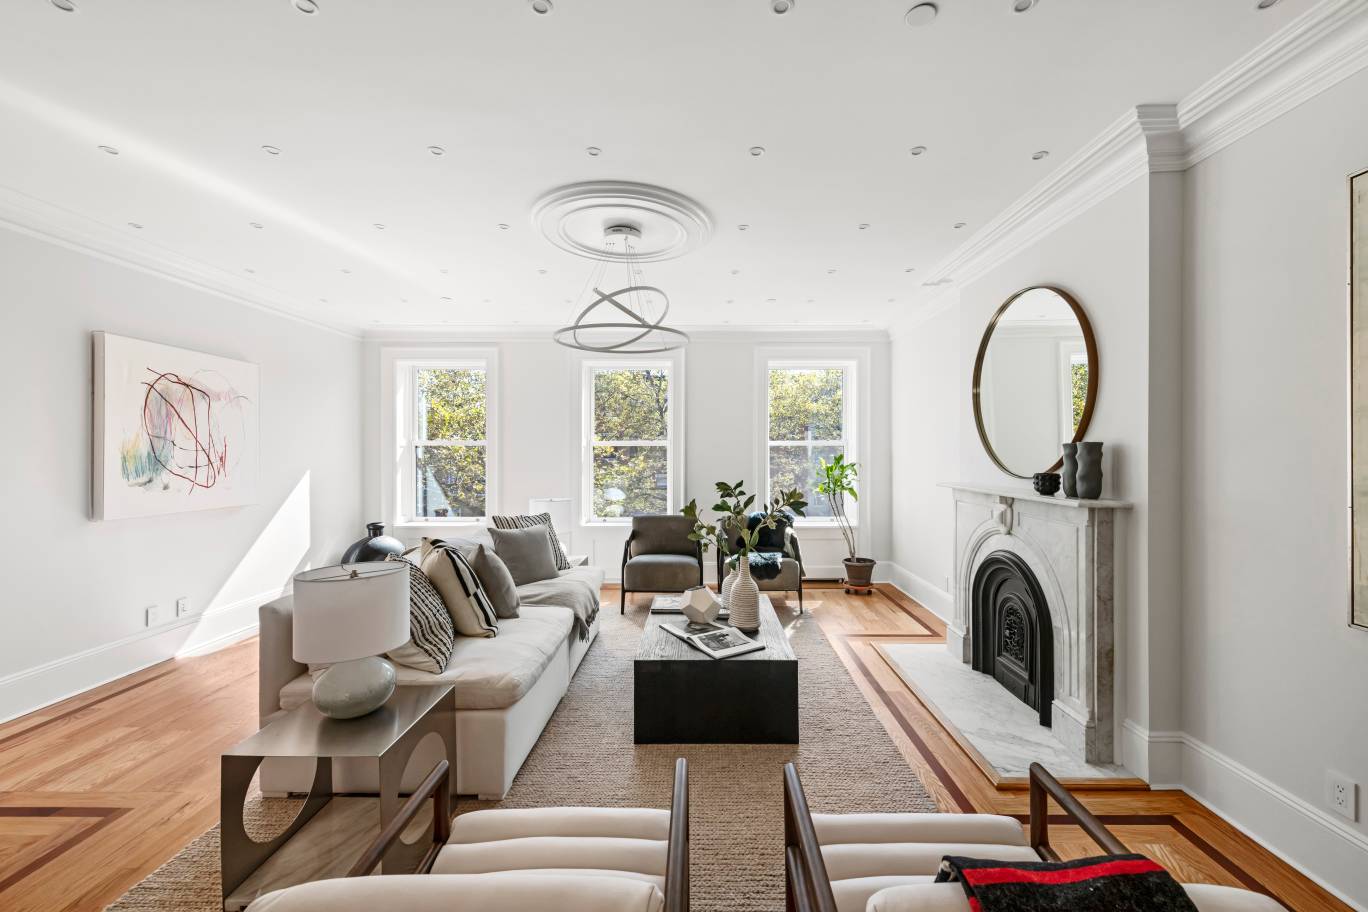 Welcome to 117 3rd Pl, a classic 20' wide Brooklyn Brownstone originally built in 1899 and now gut renovated to 2 expansive luxury condos which have just completed their top ...